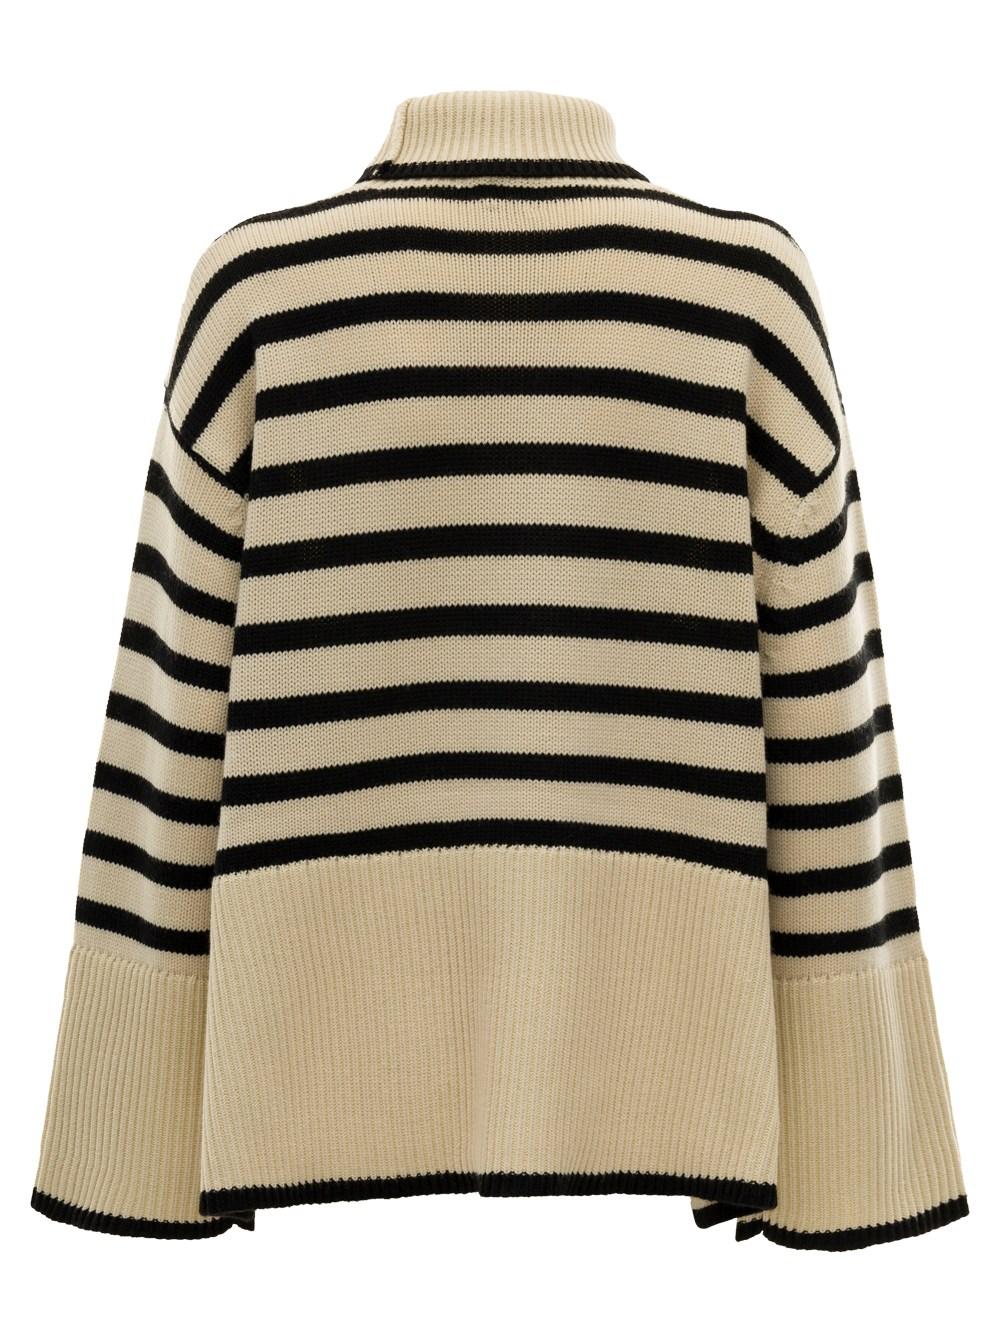 Totême Black And Striped Turtleneck Sweater In Wool And Cotton | Lyst